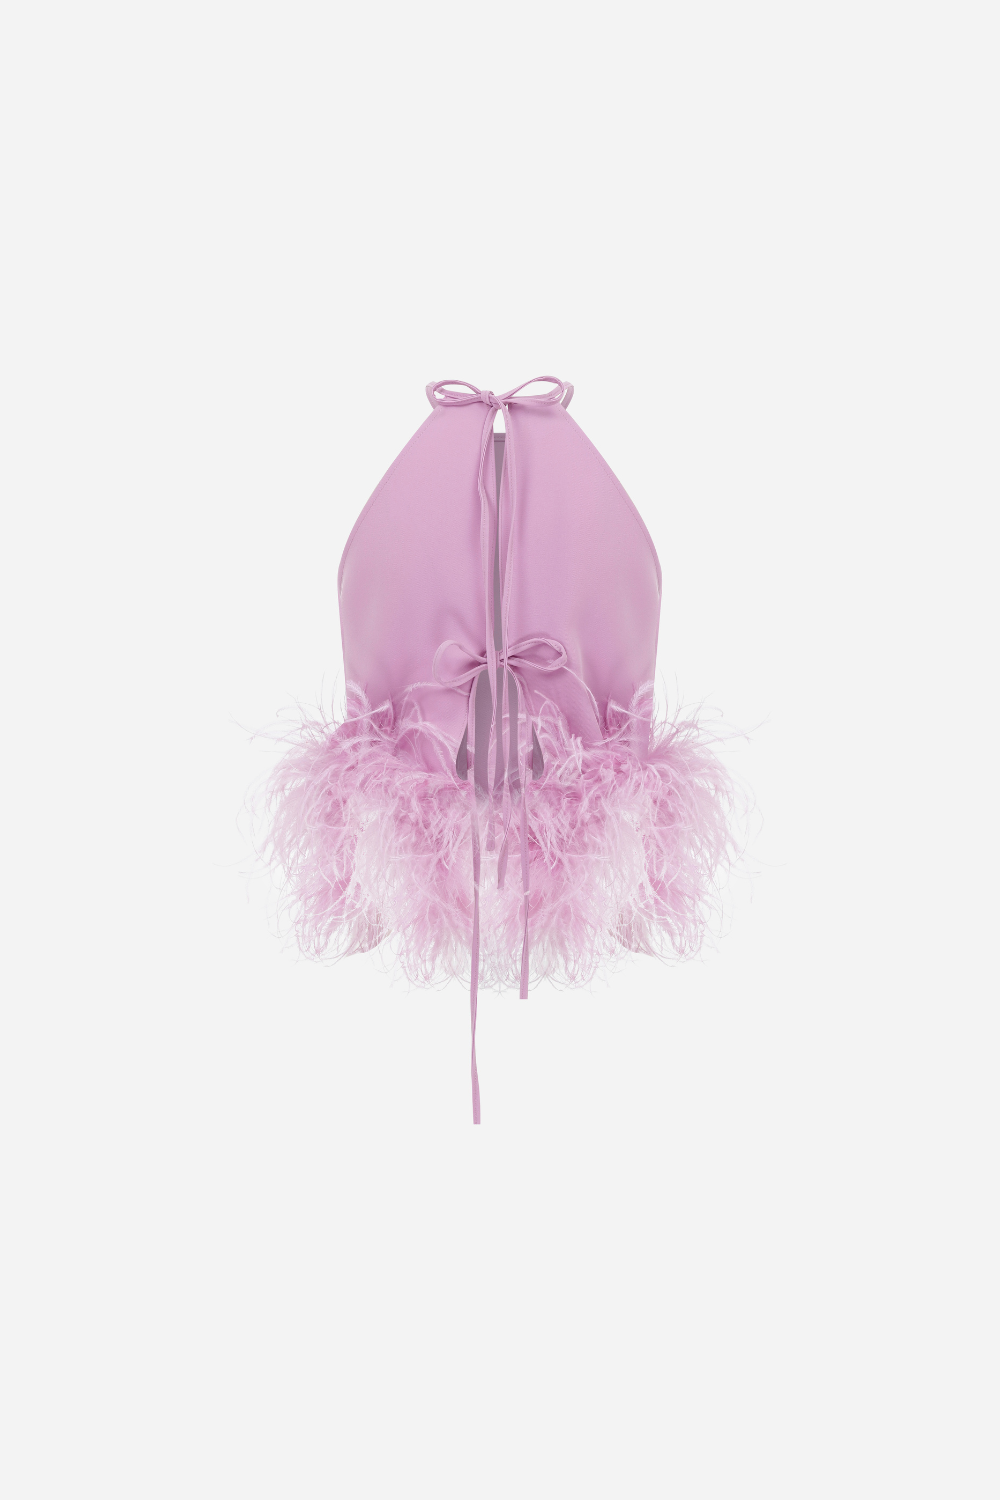 KOS - Halter neck top with feather trim in lilac